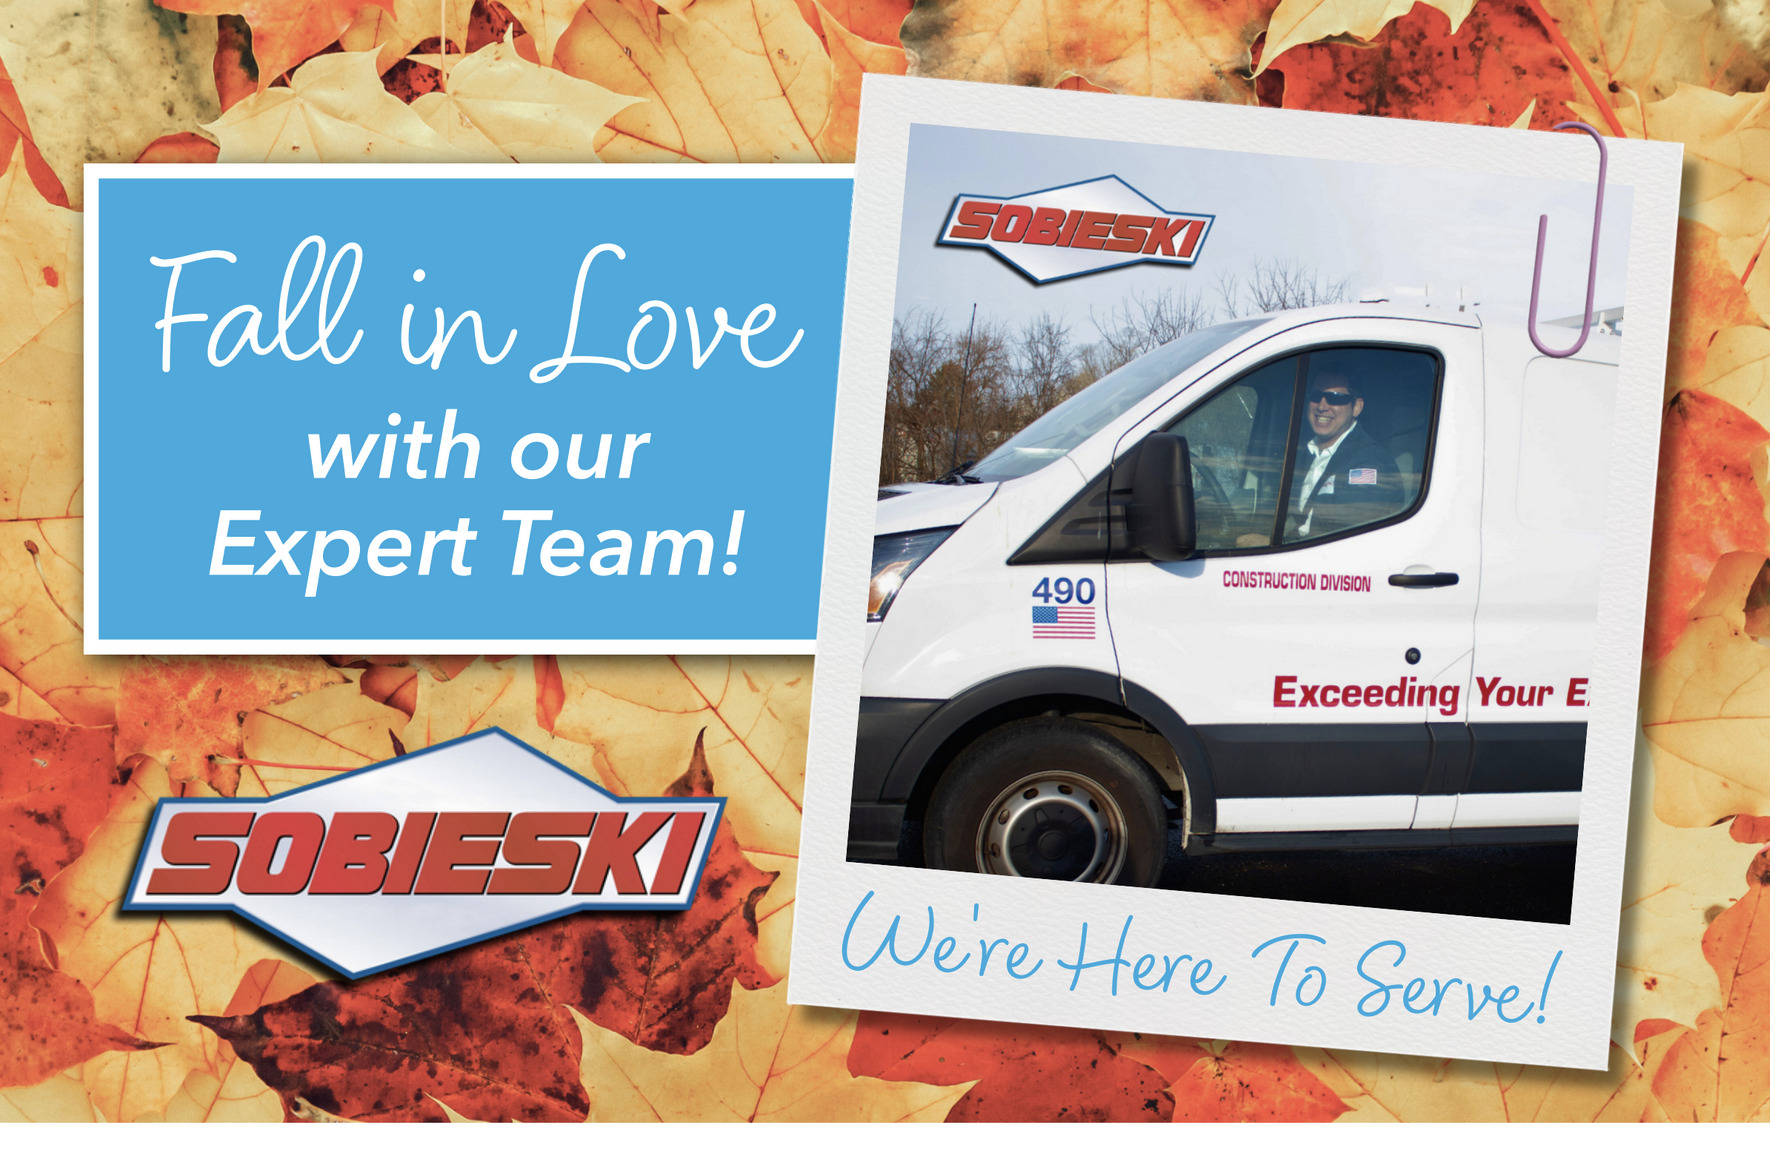 Fall in Love with our Expert Team!